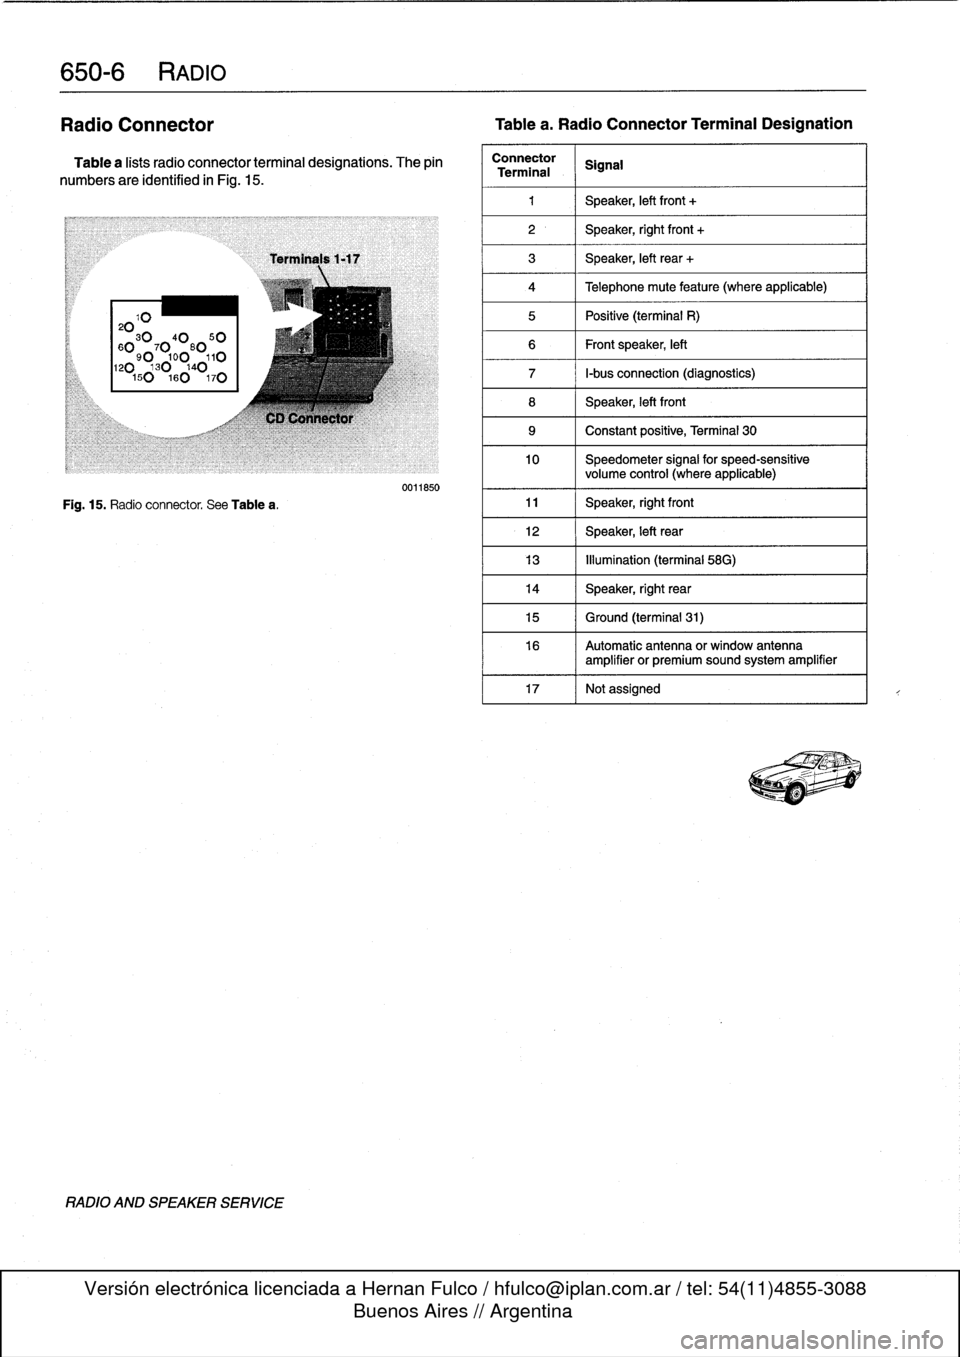 BMW M3 1993 E36 User Guide 
650-
6
RADIO

Radio
Connector

	

Tablea
.
Radio
Connector
Terminal
Designation

Table
a
lists
radio
connector
terminal
designations
.
The
pin

numbers
are
identified
in
Fig
.
15
.

20103040
50

60
9